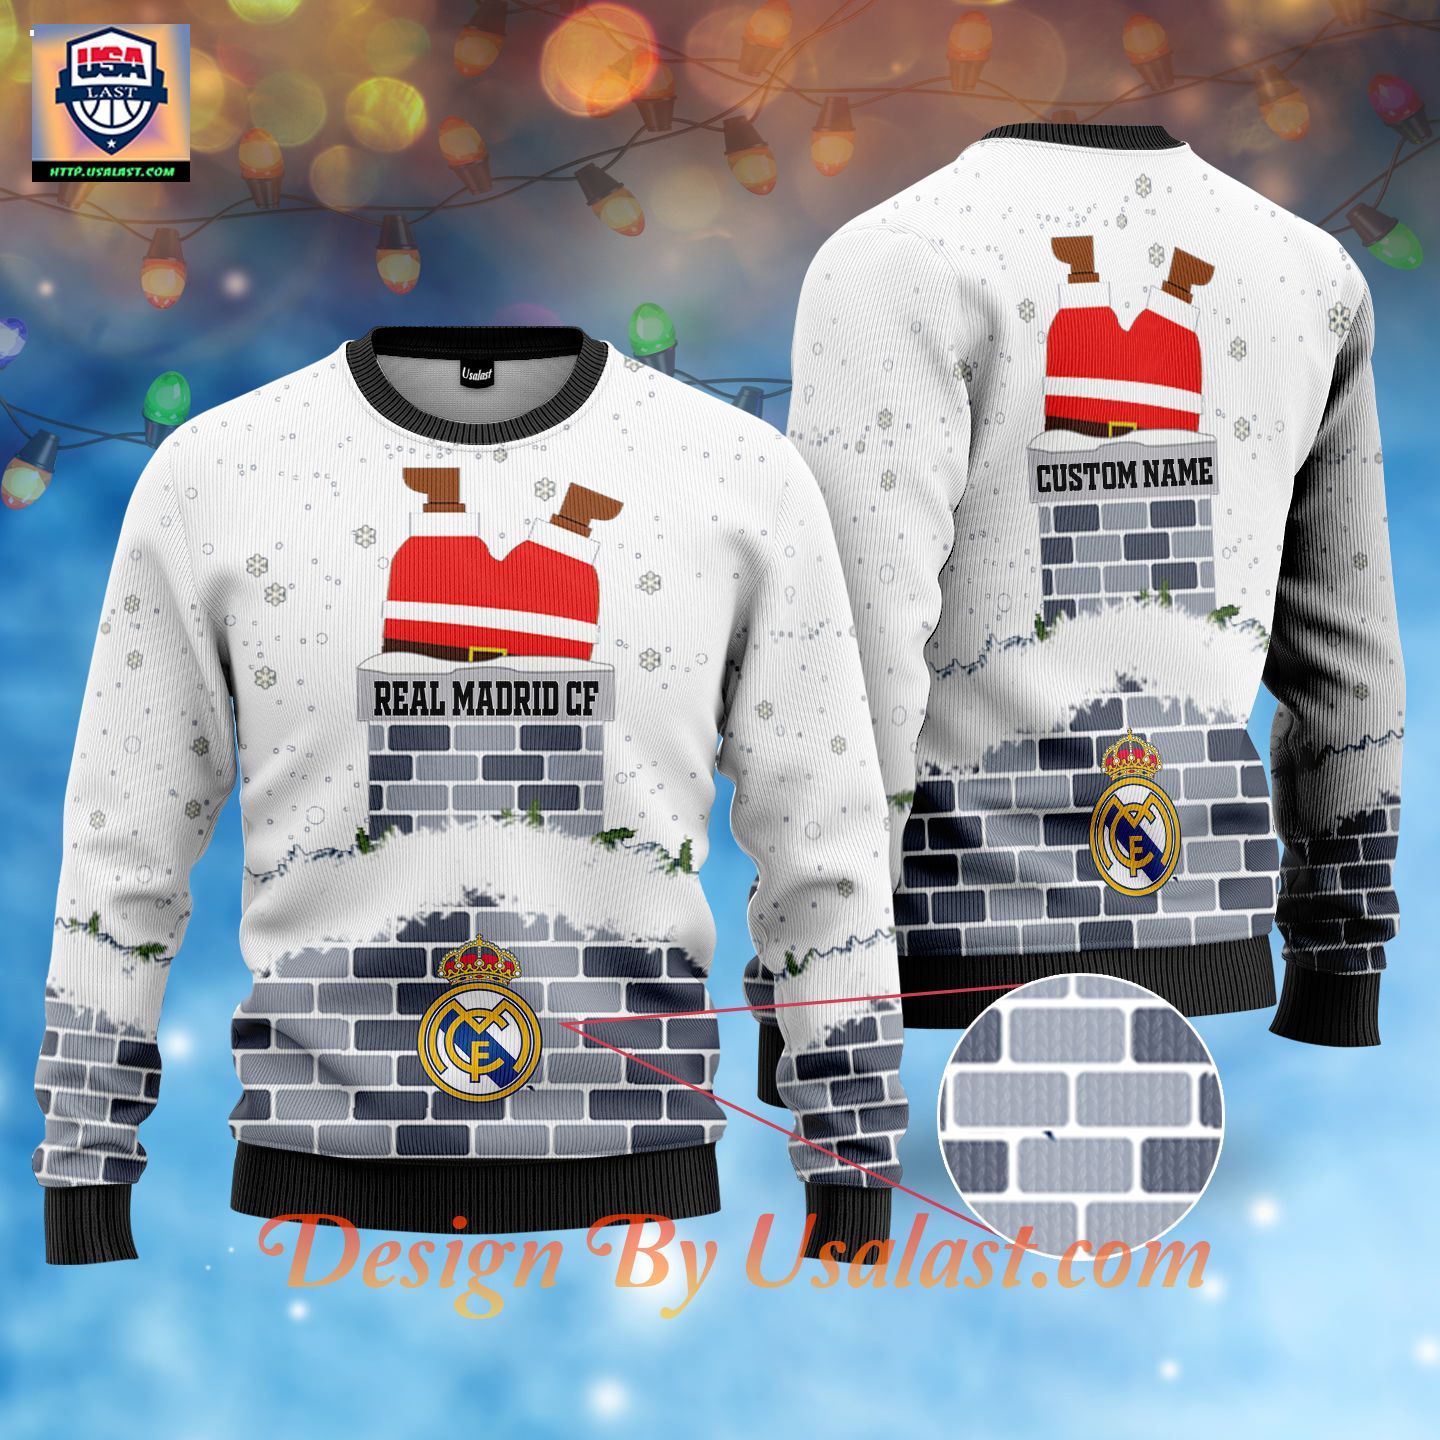 Real Madrid CF Santa Claus Custom Name Ugly Christmas Sweater - Rocking picture